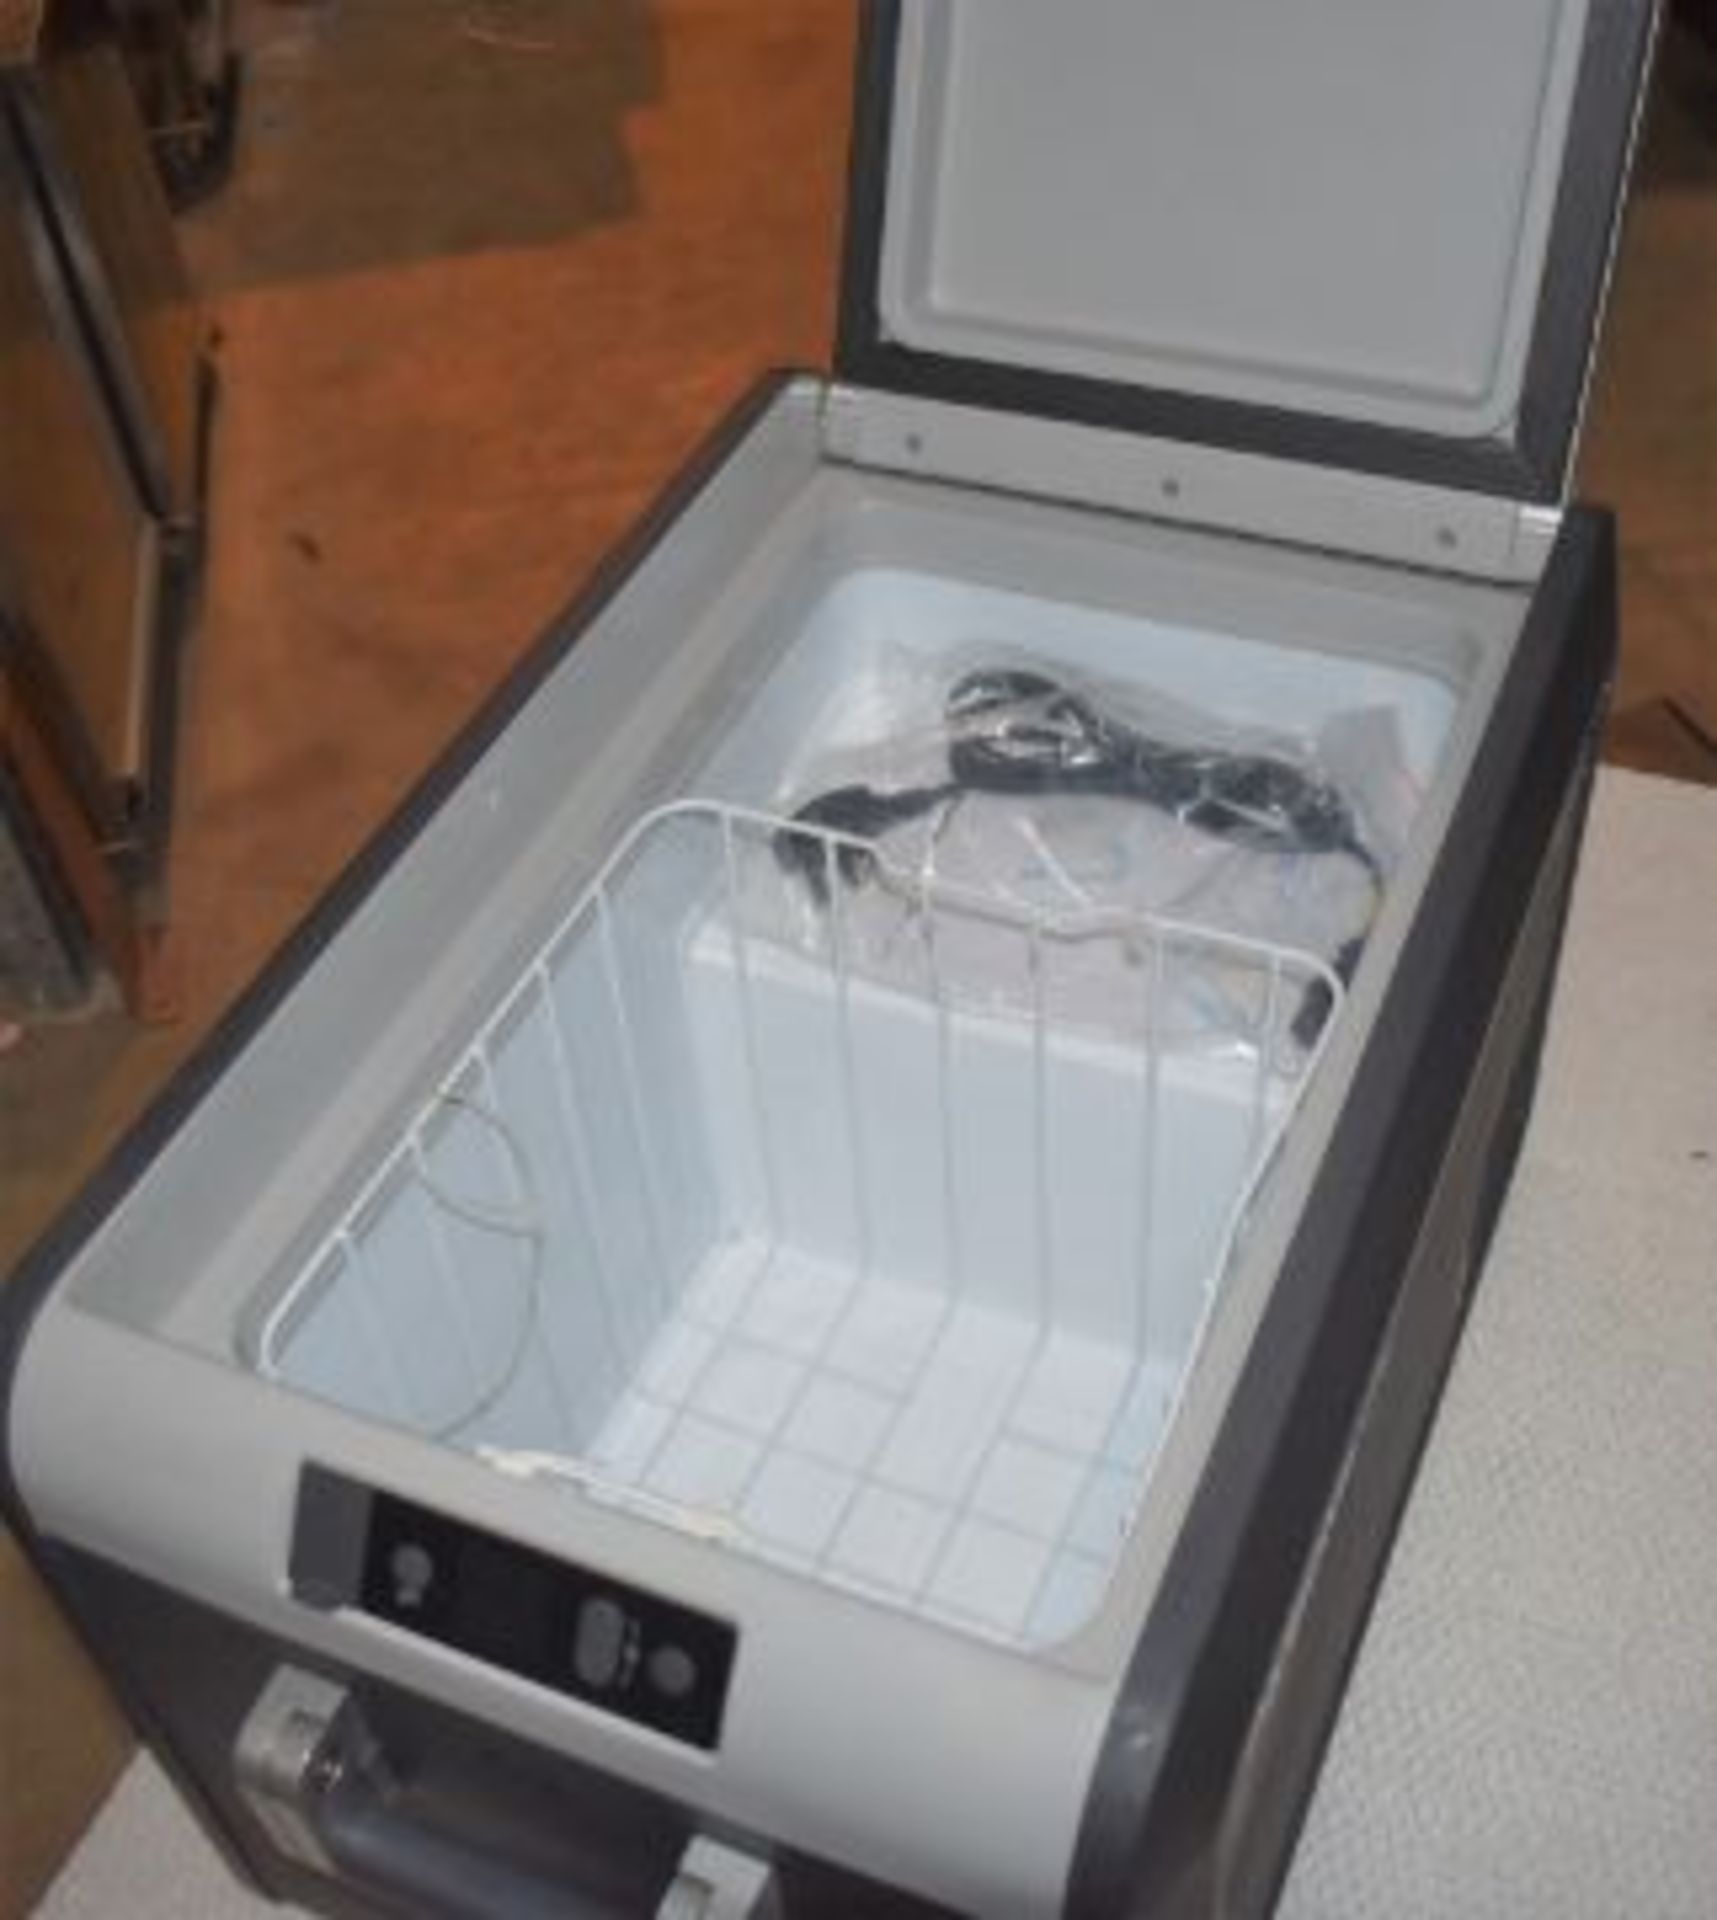 1 x Dometic CFX3 35 Portable 32l Compressor Cooler and Freezer - Perfect For Cooling The Christmas - Image 5 of 9